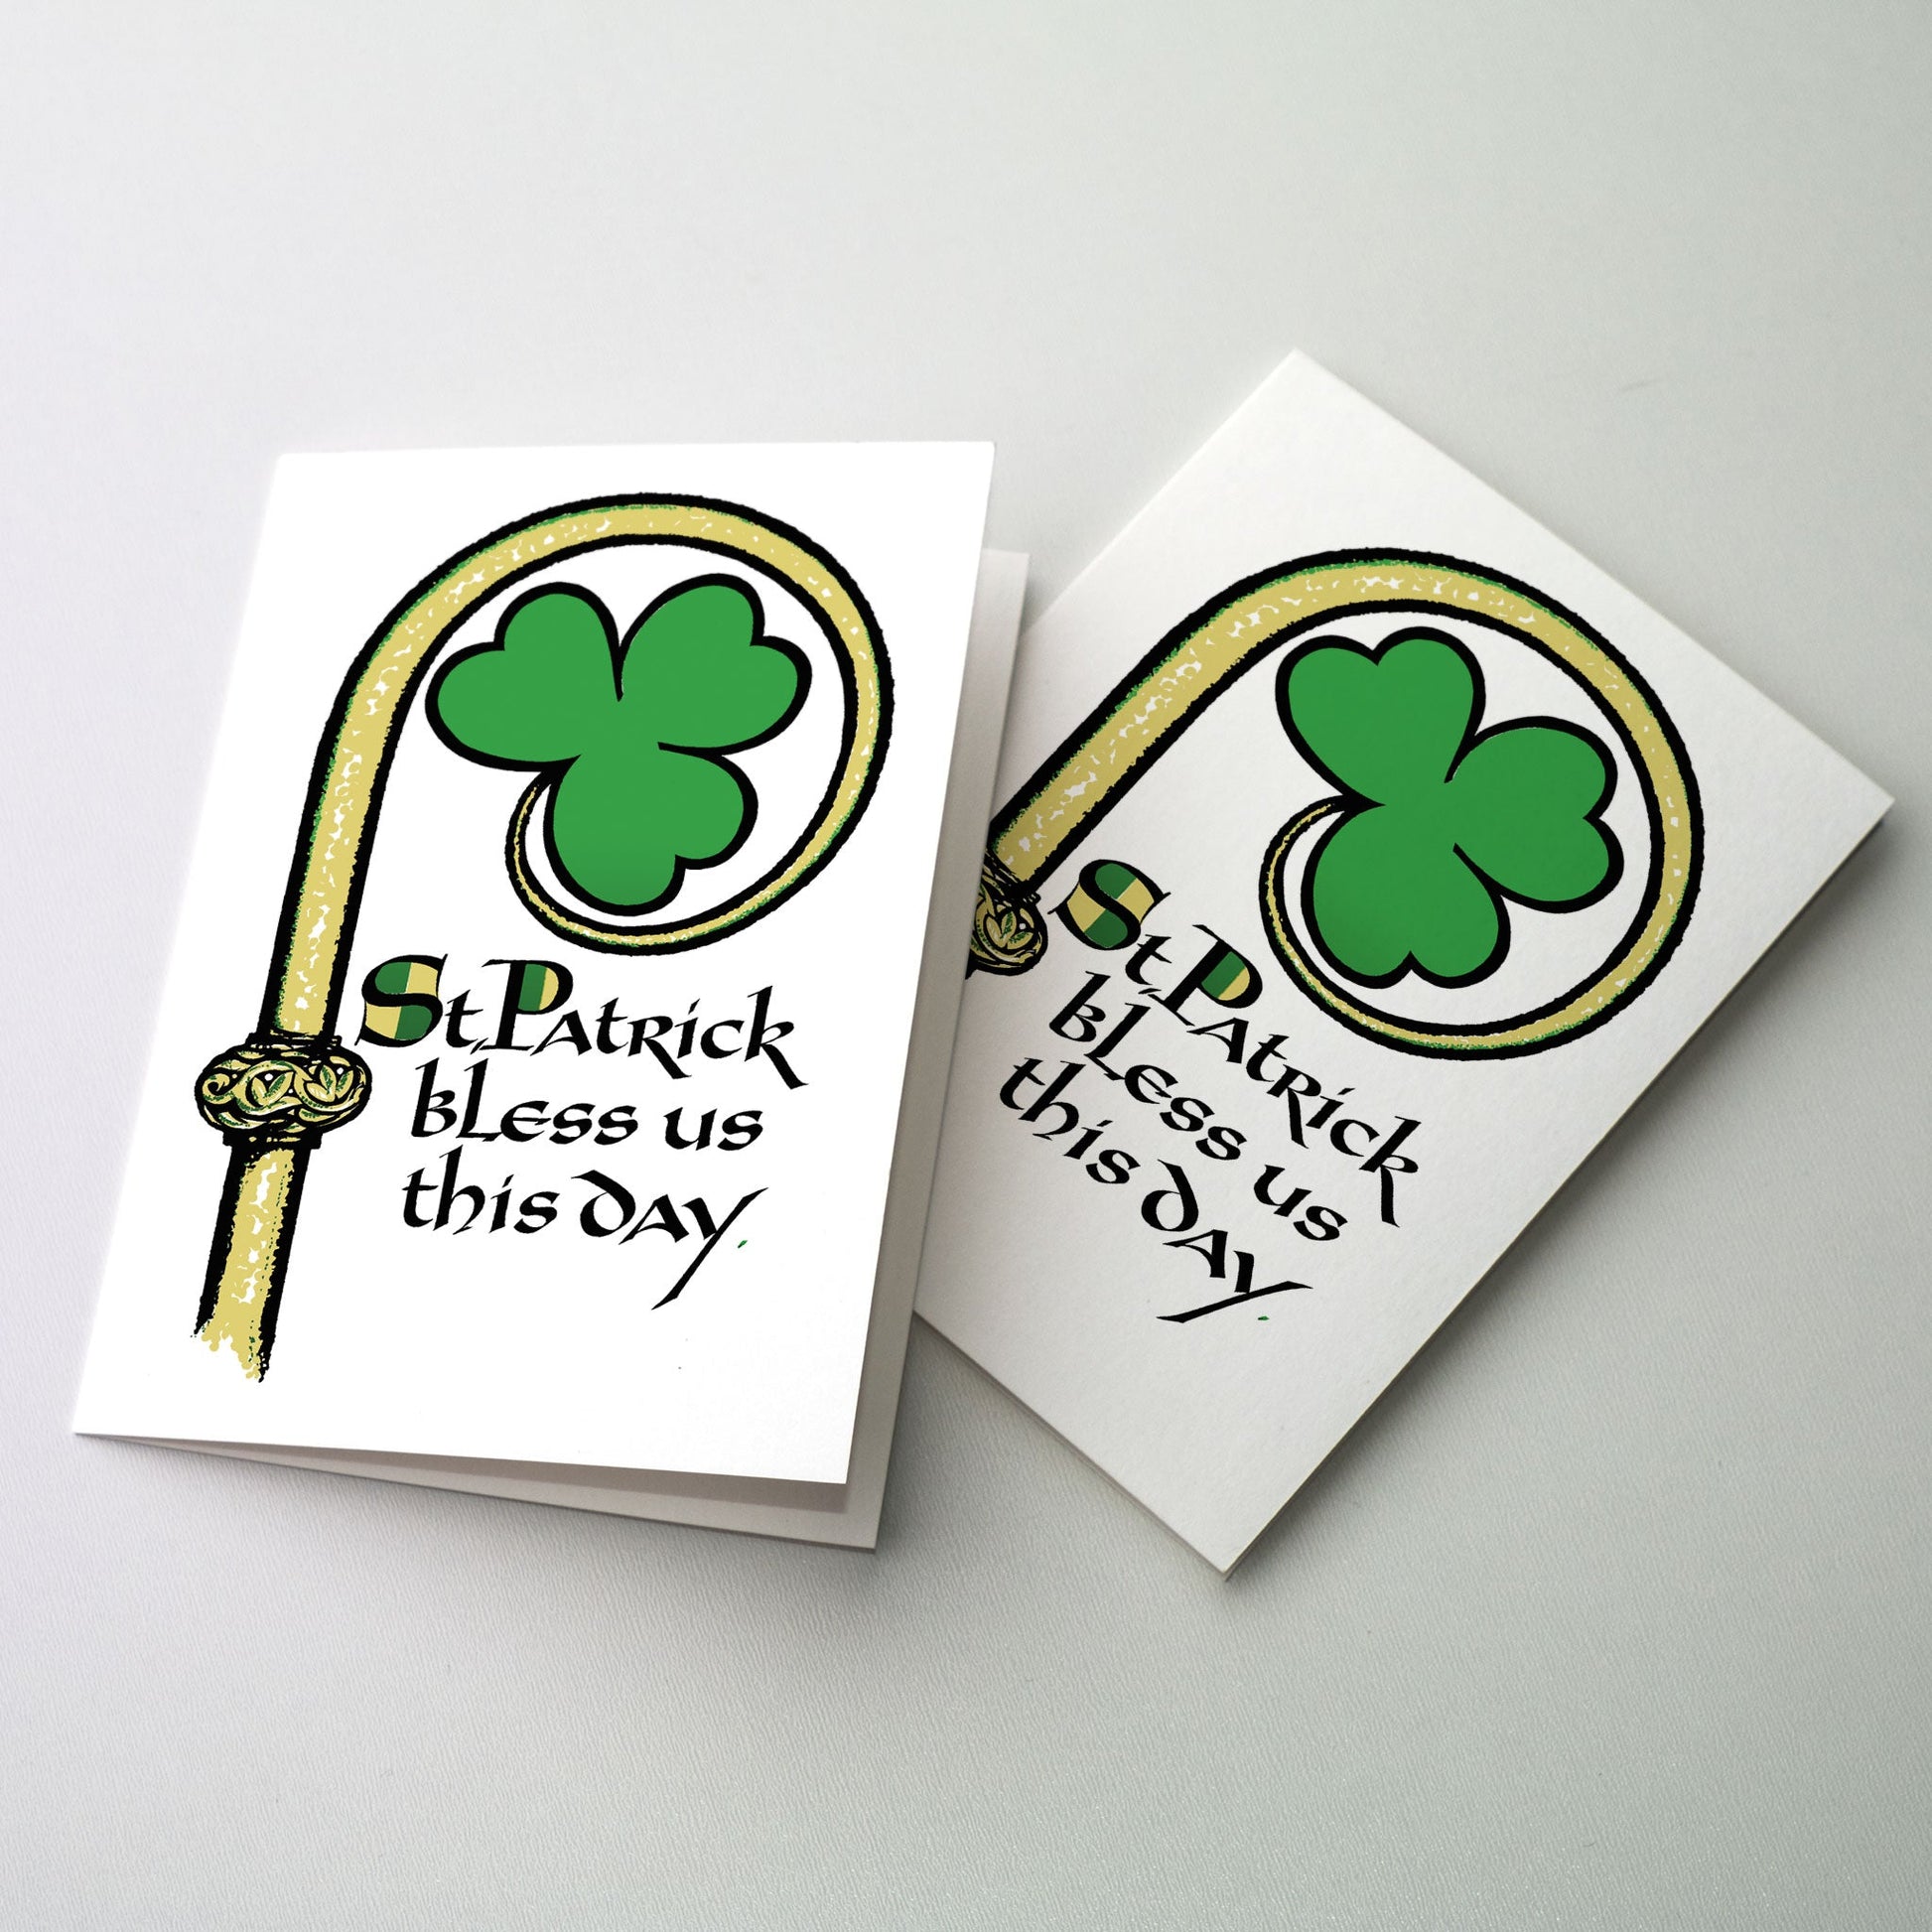 Golden Shamrock crosier with cover calligraphy